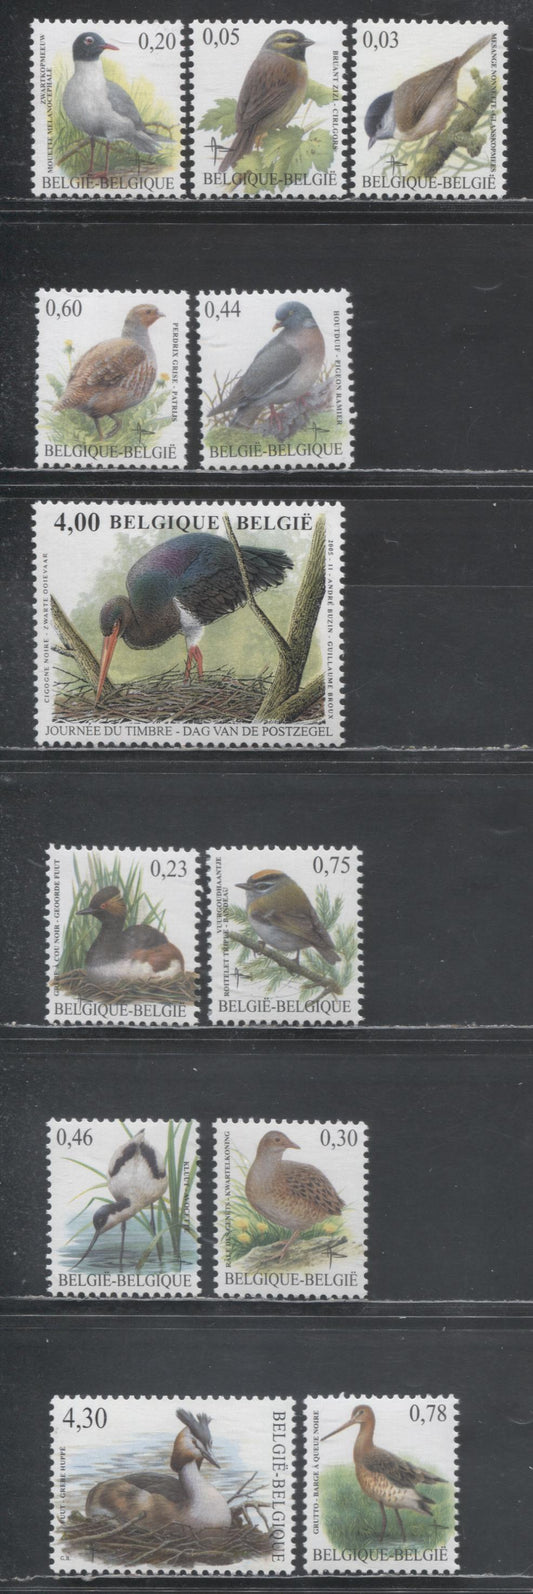 Lot 77 Belgium SC#2071/2127 2005-2007 Bird Definitives & Stamp Day Issues, 11 VFNH Singles, Click on Listing to See ALL Pictures, 2017 Scott Cat. $35.8